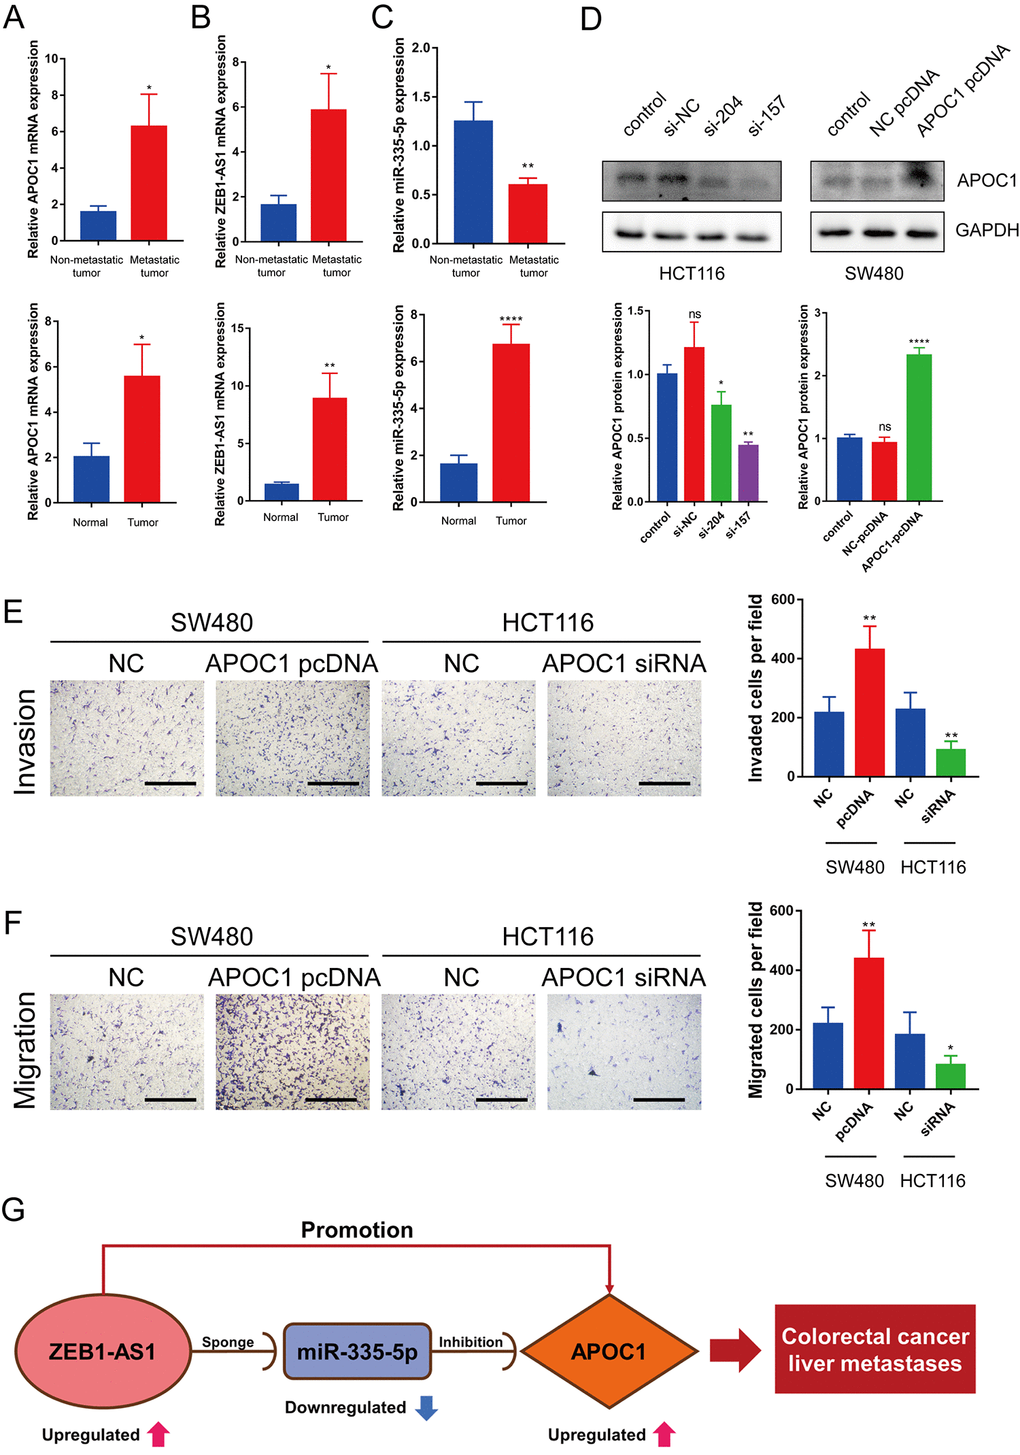 Expression of ZEB1-AS1, miR-335-5p and APOC1 in CRC tumor tissues and APOC1 promotes CRC cell migration and invasion in vitro. (A–C) Expression of APOC1, ZEB1-AS1 and miR-335-5p in normal colon tissues and CRC tumor tissues with metastasis or without metastasis were detected by RT-qPCR. (D) APOC1 expression was knocked down successfully using small interference RNA (siRNA) in HCT116 cells, and APOC1 expression was overexpressed using a plasmid vector in SW480 cells. All expression levels were detected by western blotting. Representative immunoblots and the ratios of the indicated proteins to GAPDH are presented. (E, F) Knockdown of APOC1 expression inhibited HCT116 cells migration and invasion, while overexpression of APOC1 increased SW480 cells migration and invasion (Scale bar: 100 μm). (G) The novel mRNA-miRNA-lncRNA competing endogenous RNA (ceRNA) triple regulatory sub-network related to prognosis of CRLM. ns (Not significant), *p 